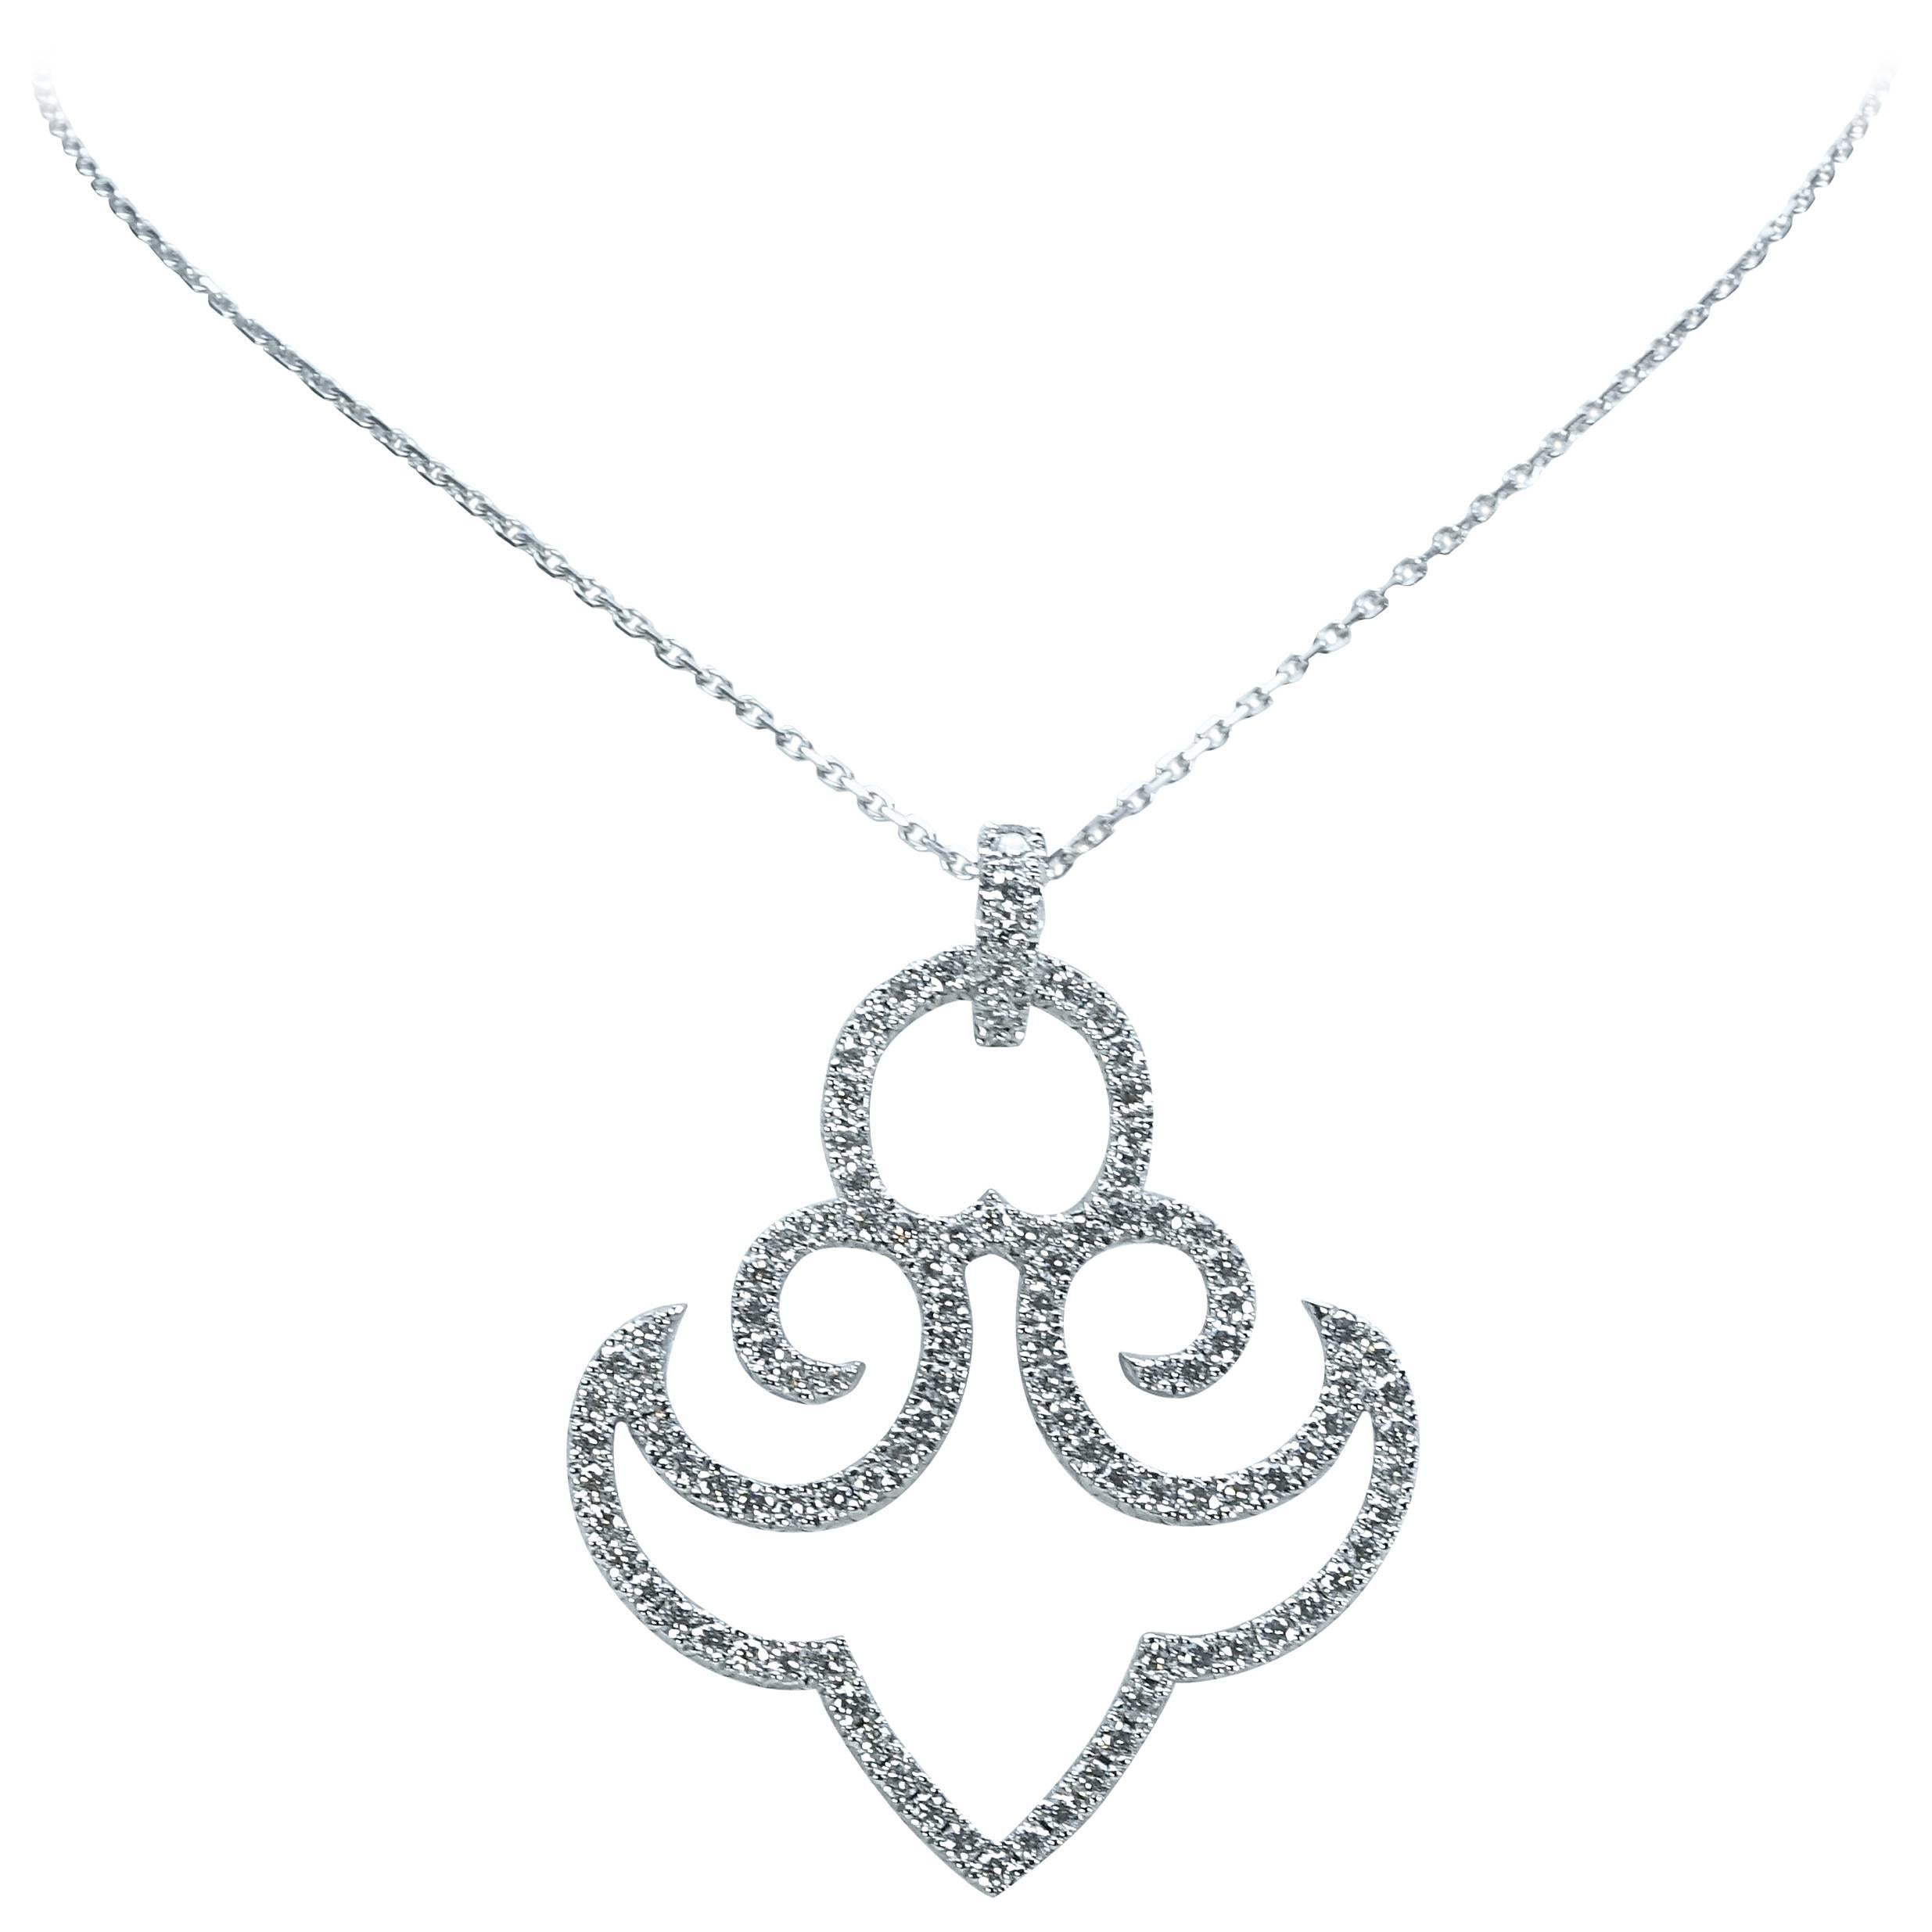 18K White Gold Chain Necklace With Diamond and 18K White Gold Anchor Pendant